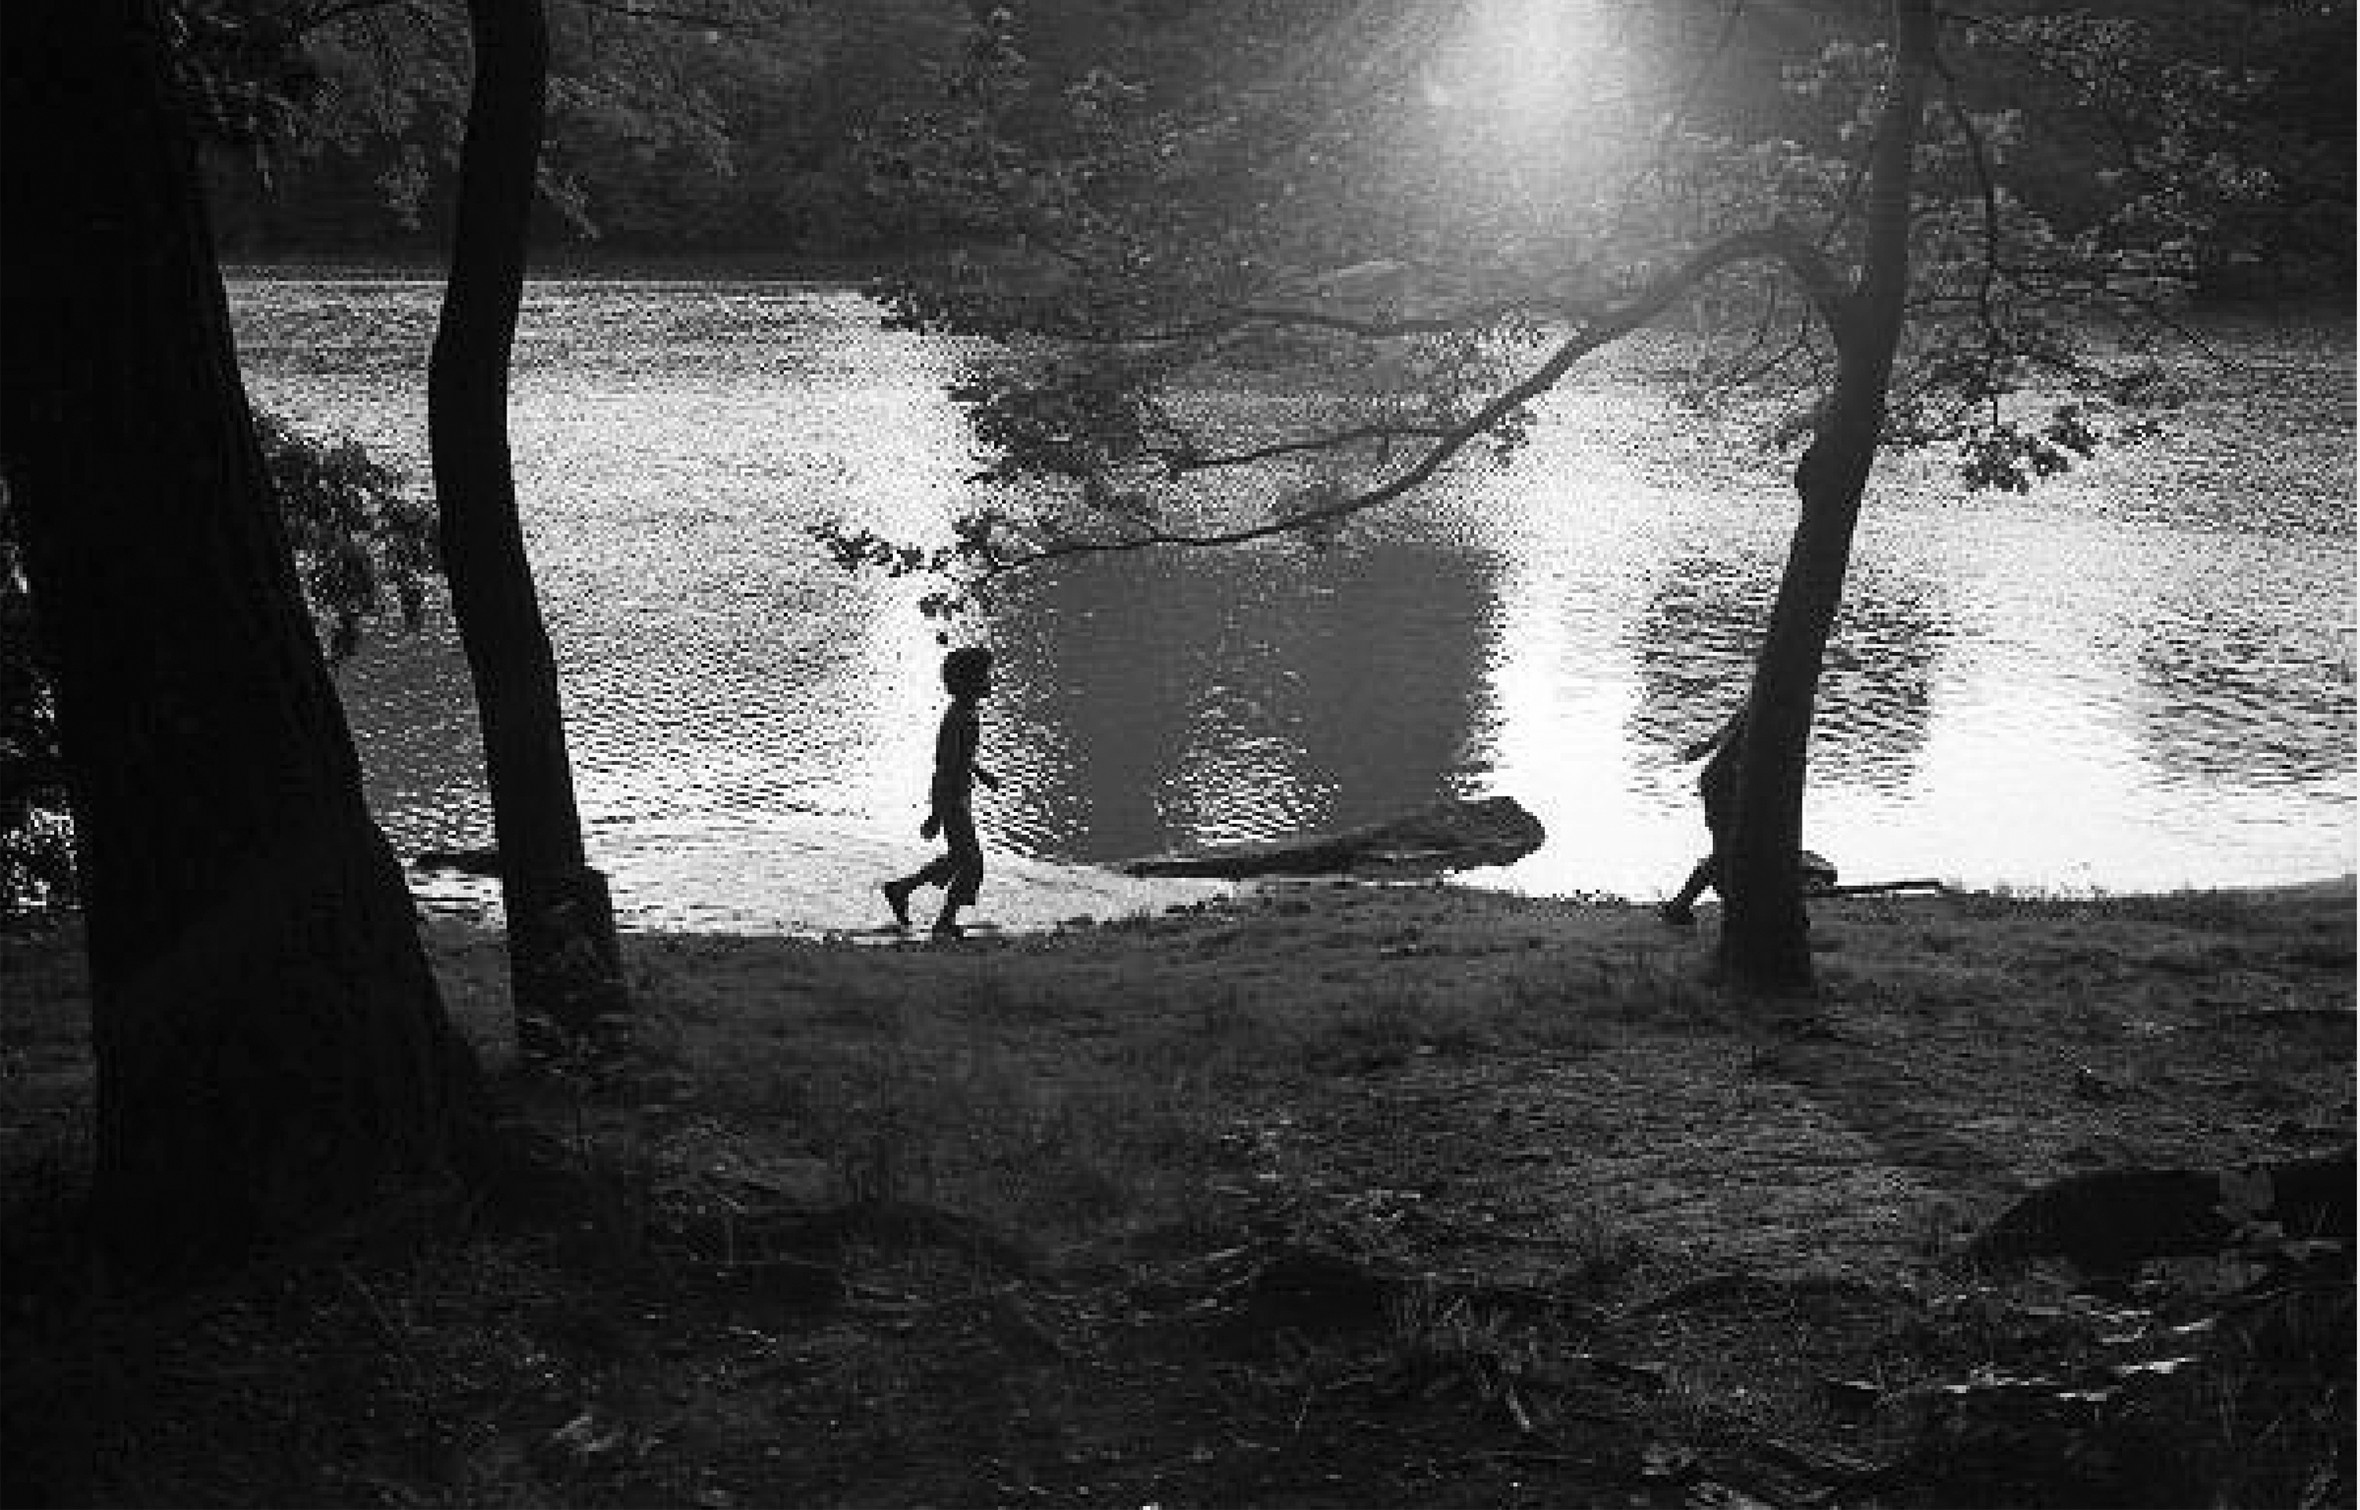 The silhouettes of two children as they walk along a lakeshore.